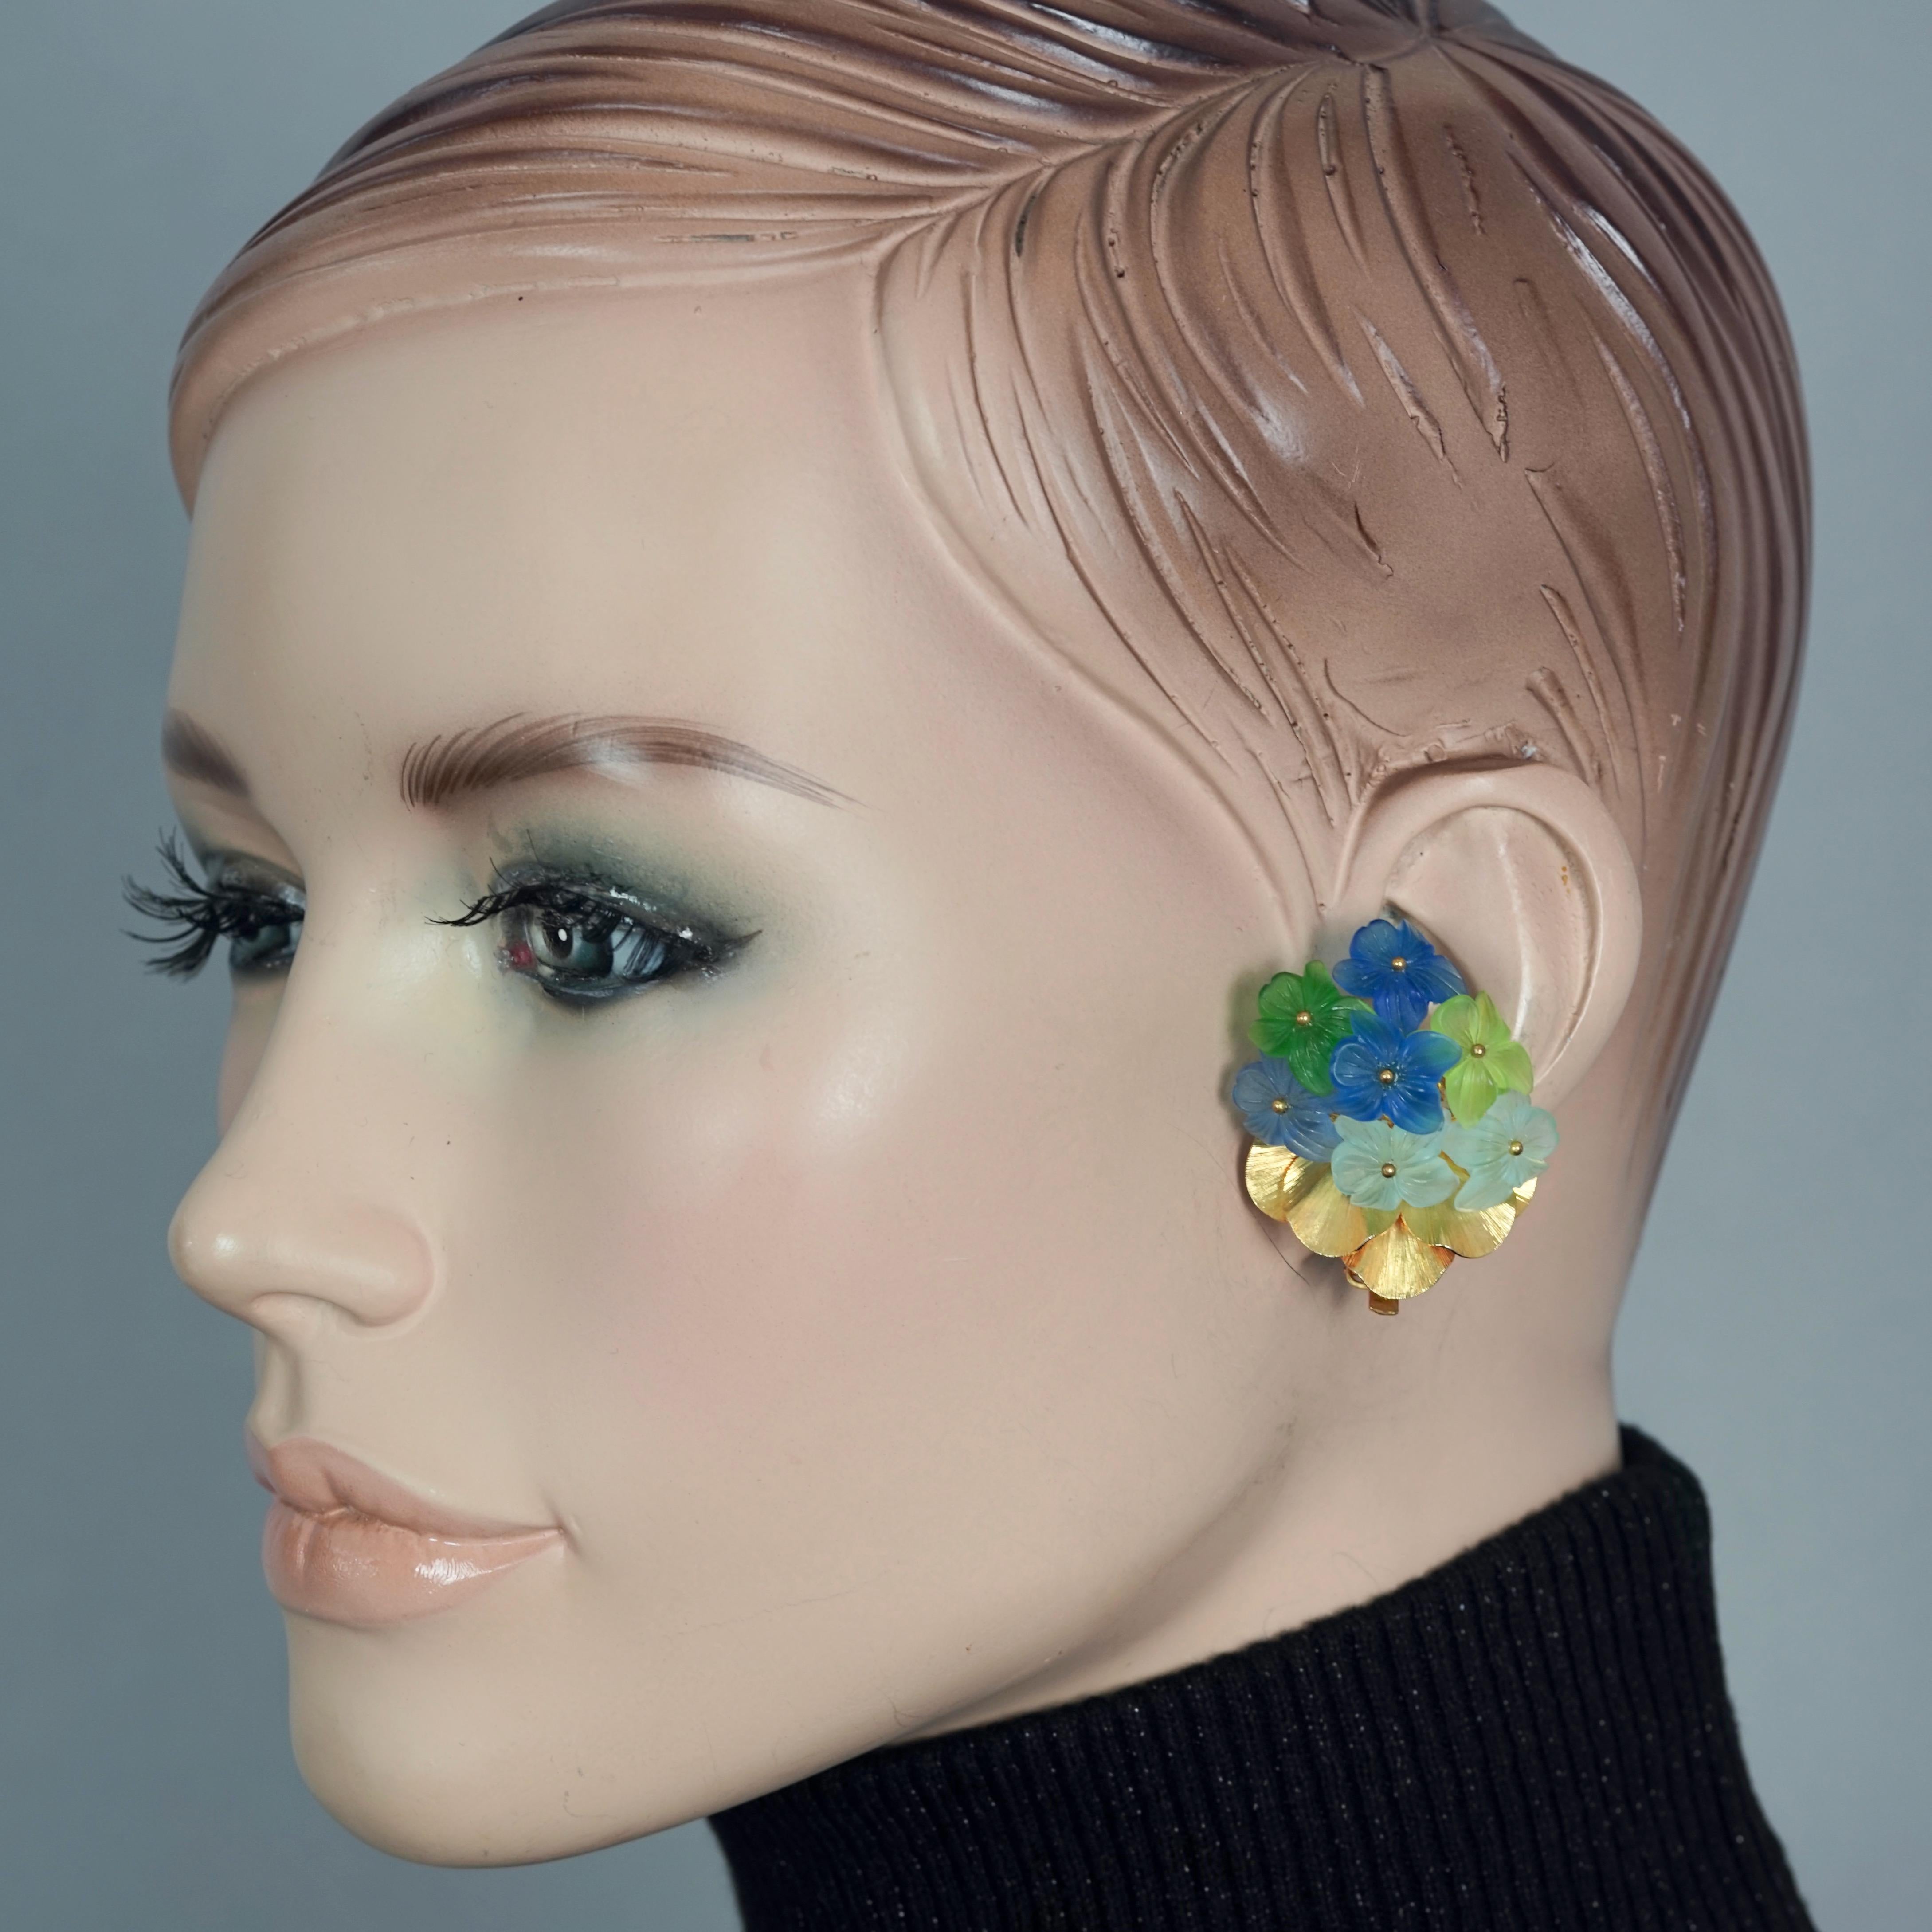 Vintage 1968 CHRISTIAN DIOR Lucite Bouquet Flower Earrings

Measurements:
Height: 1.49 inches (3.8 cm)
Width: 1.26 inches (3.2 cm)
Weight: 7 grams

Features:
- 100% Authentic CHRISTIAN DIOR.
- Bouquet of lucite flowers.
- Gold tone hardware.
-